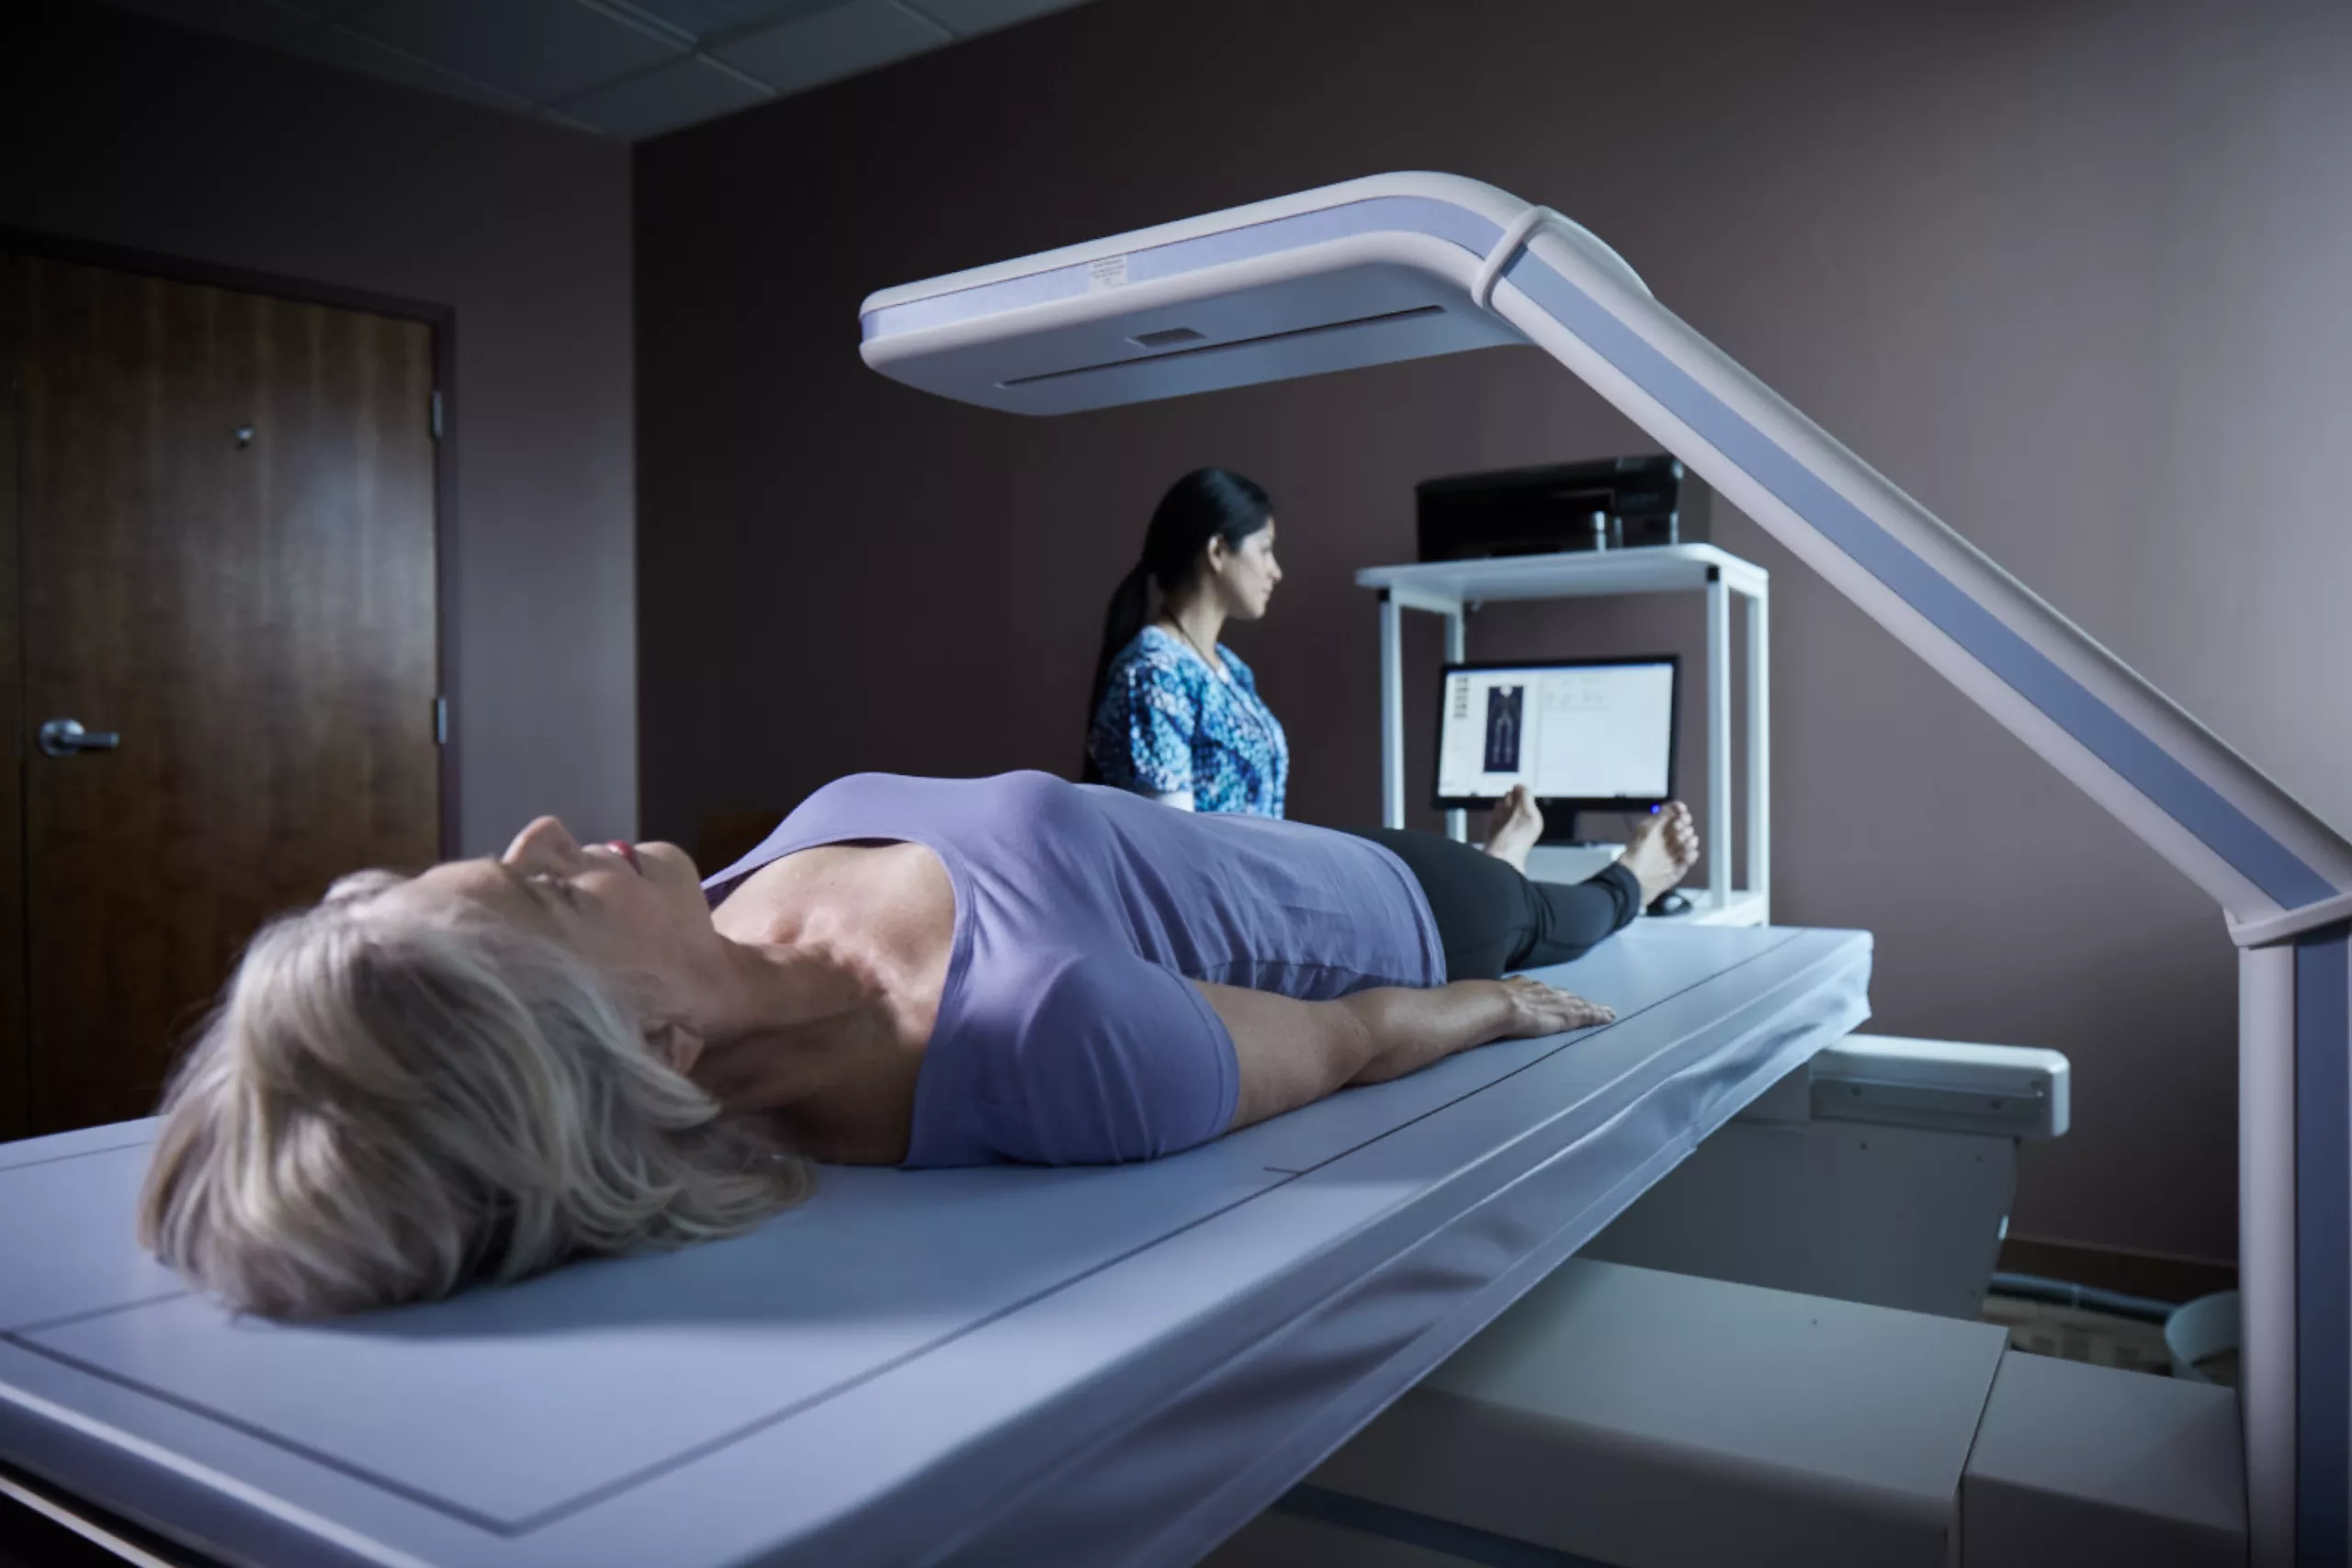 Patient lays on scanning table in lab setting